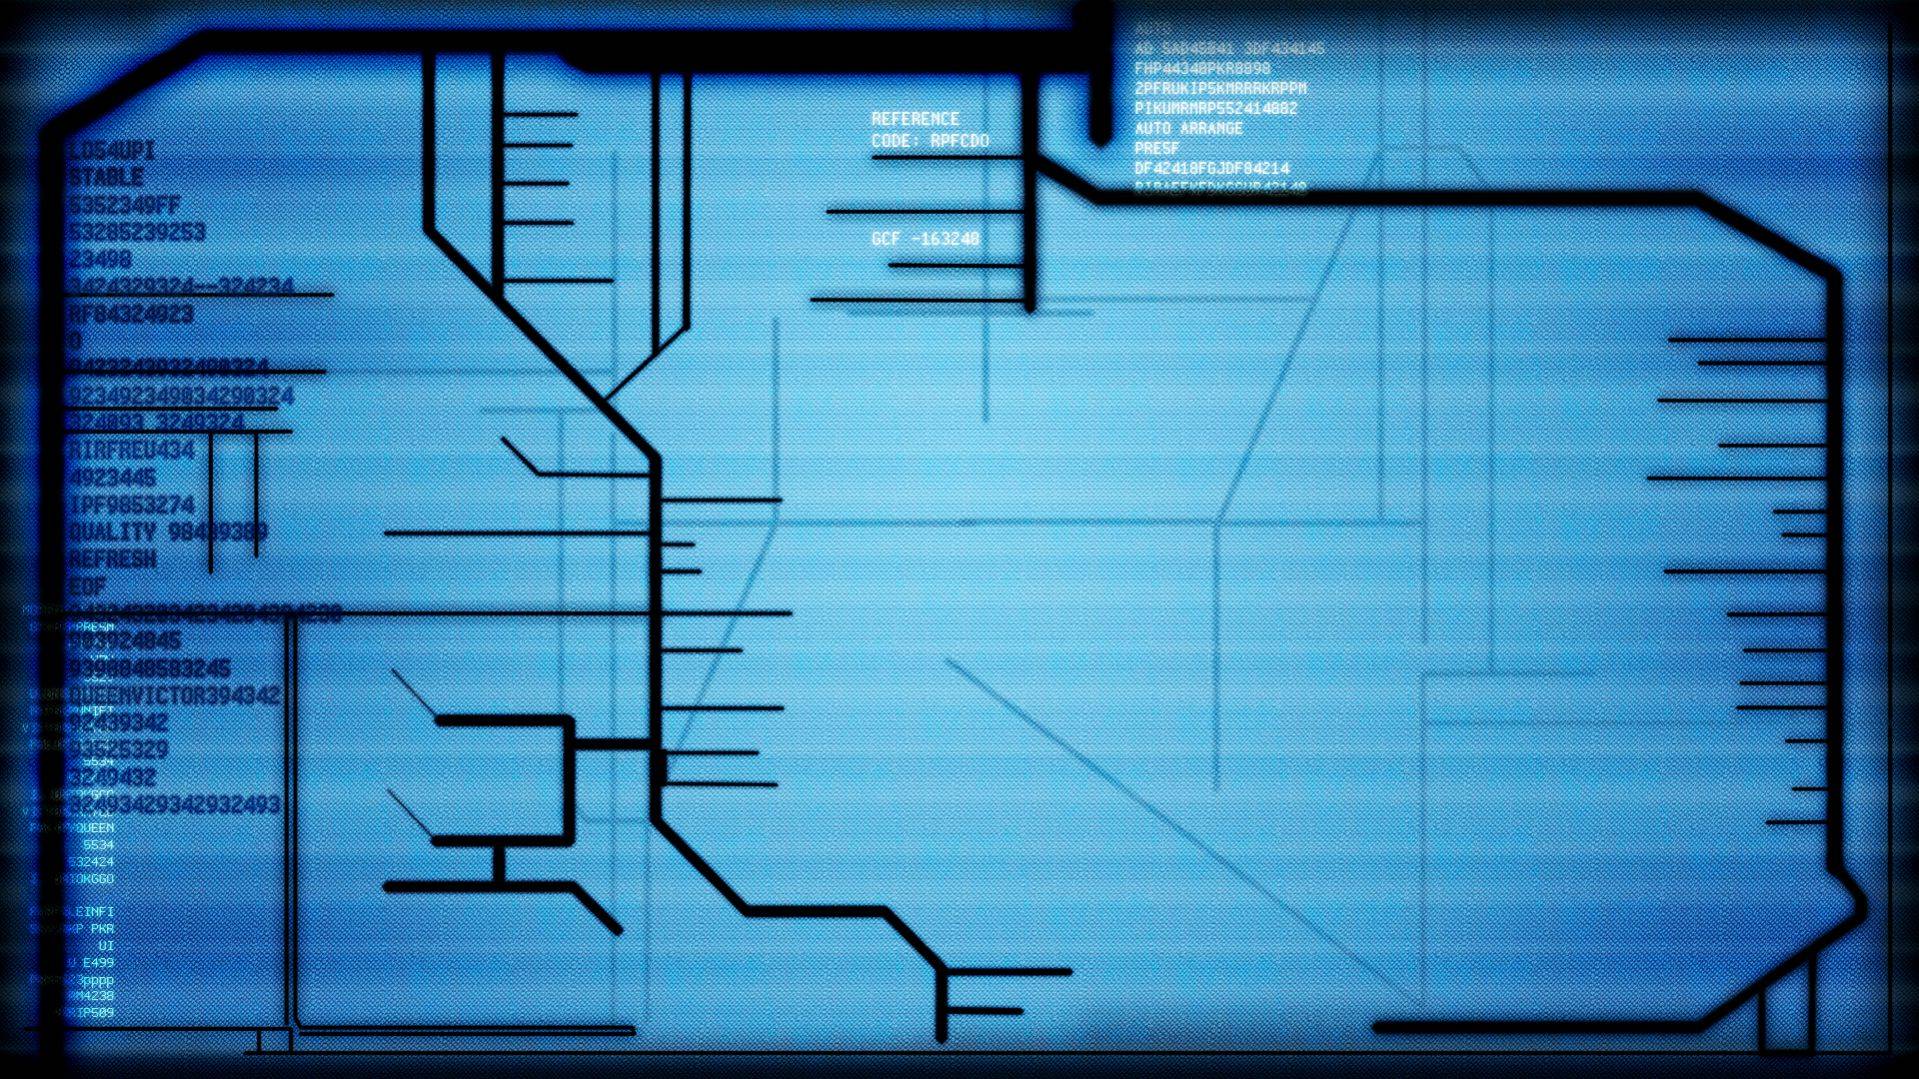 Combine interface / terminal (1920x1080) Made this, incase